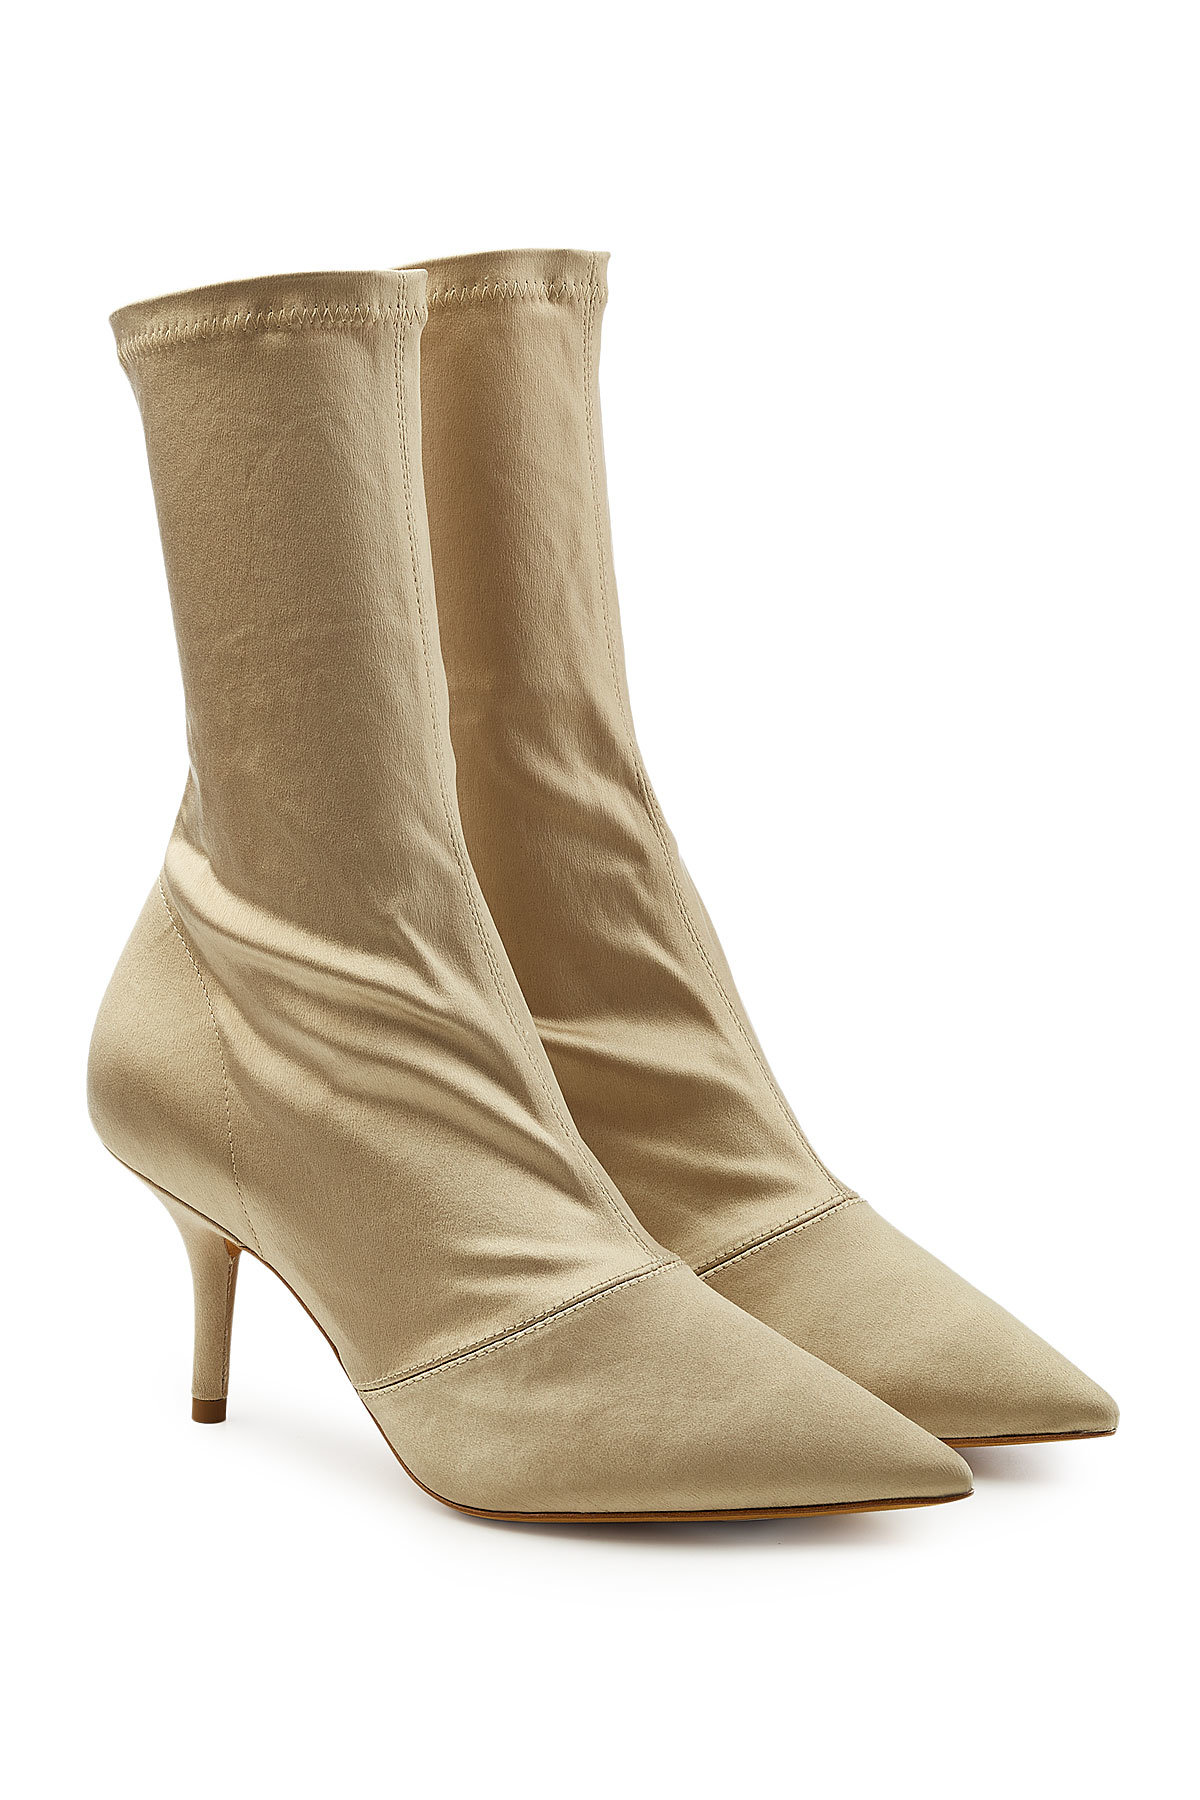 Satin Ankle Boots by Yeezy